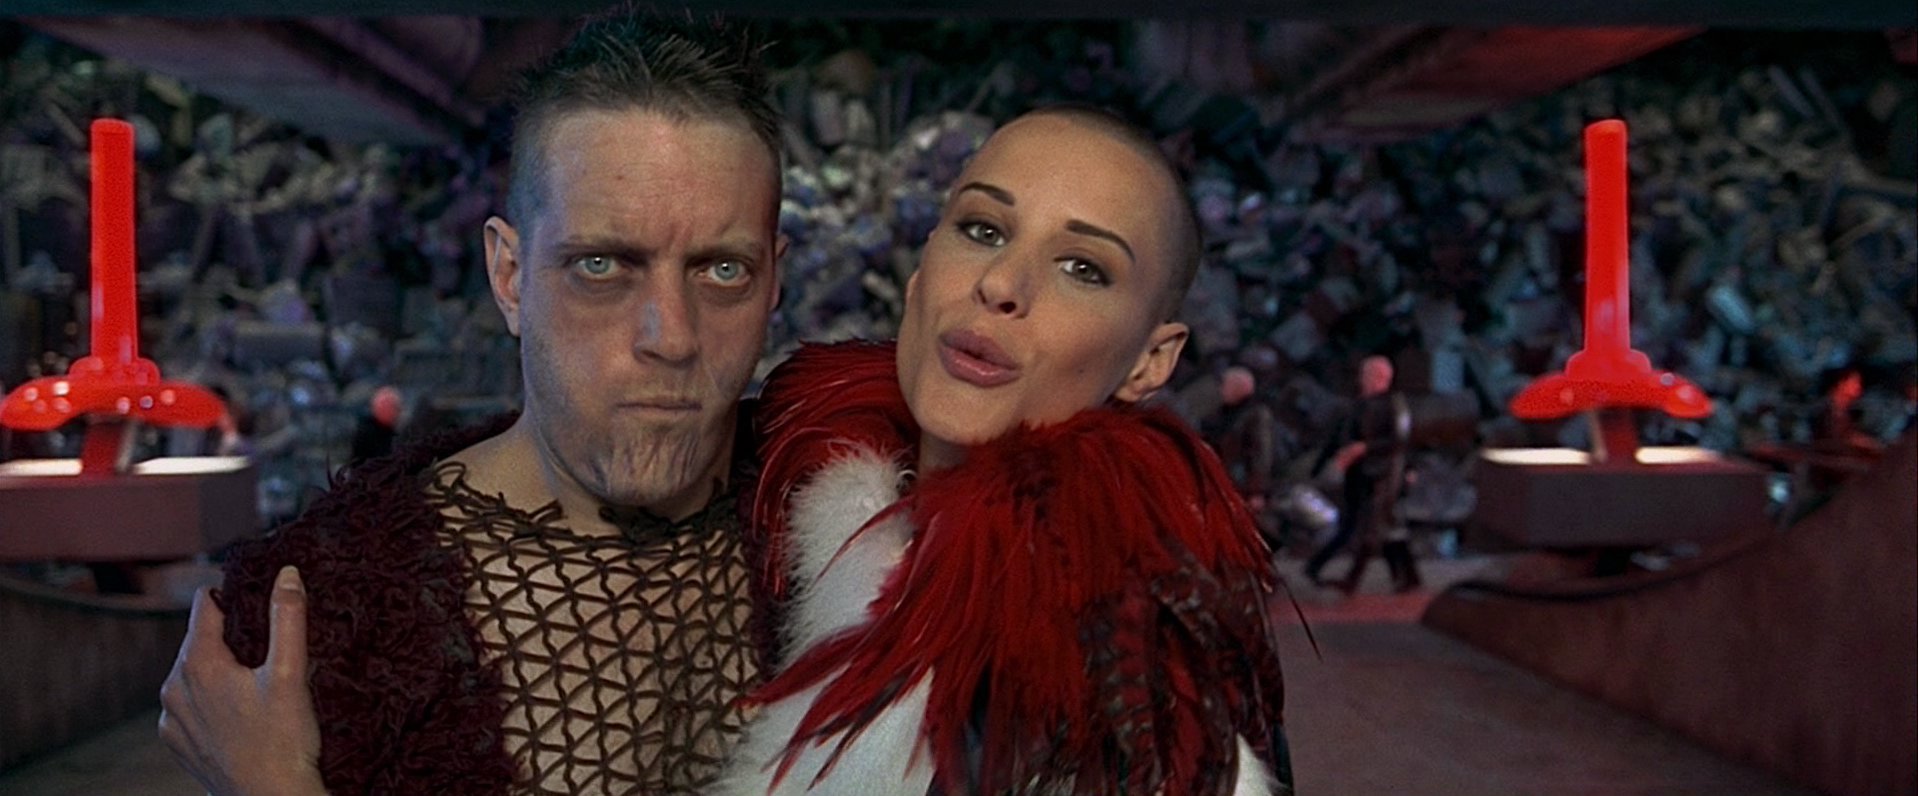 The Fifth Element Images on Fanpop.